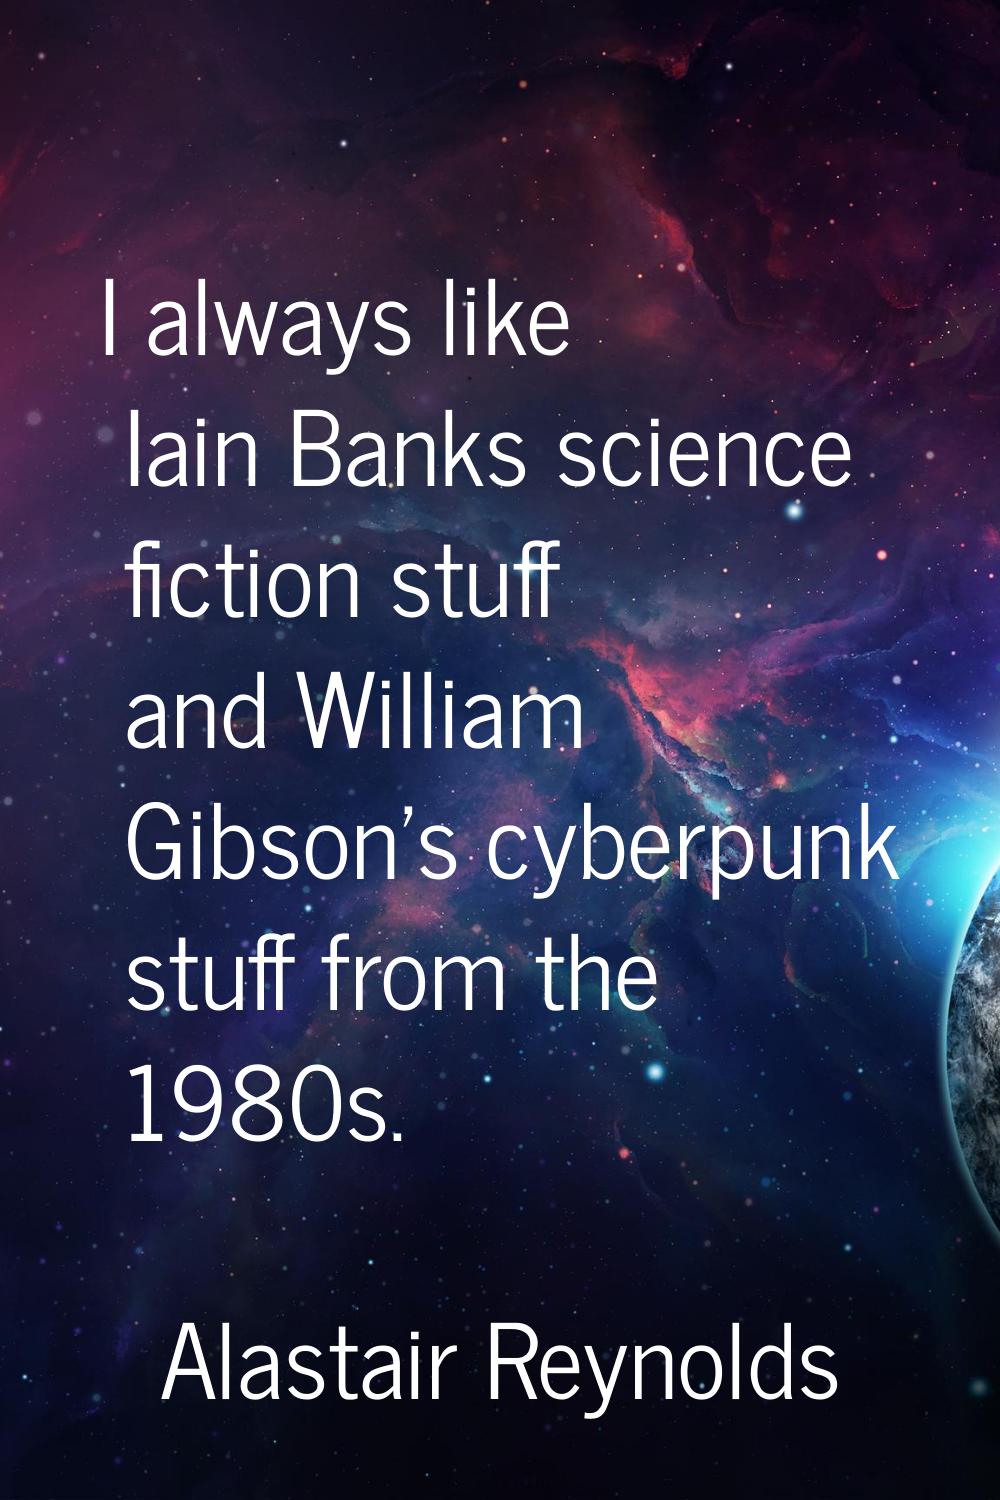 I always like Iain Banks science fiction stuff and William Gibson's cyberpunk stuff from the 1980s.